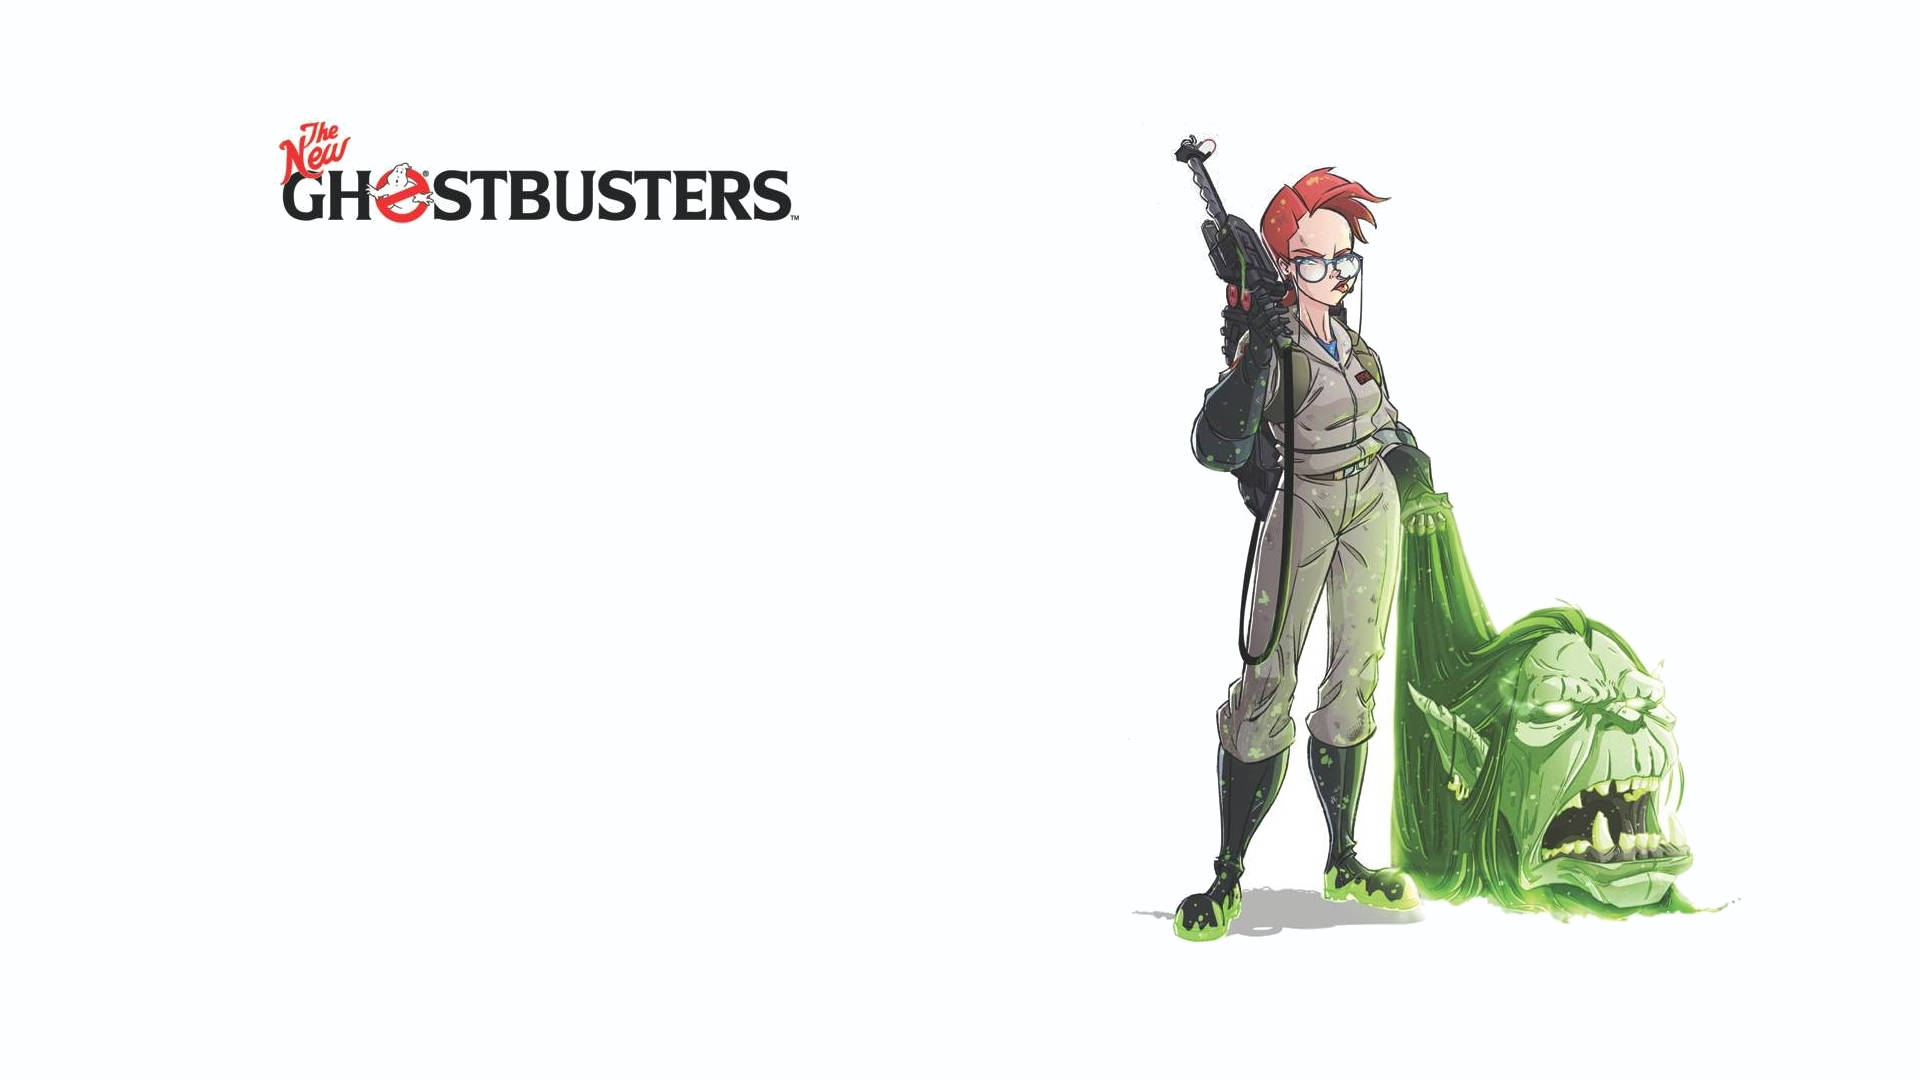 Meet the new Ghostbusters - ready to take on supernatural feats! Wallpaper